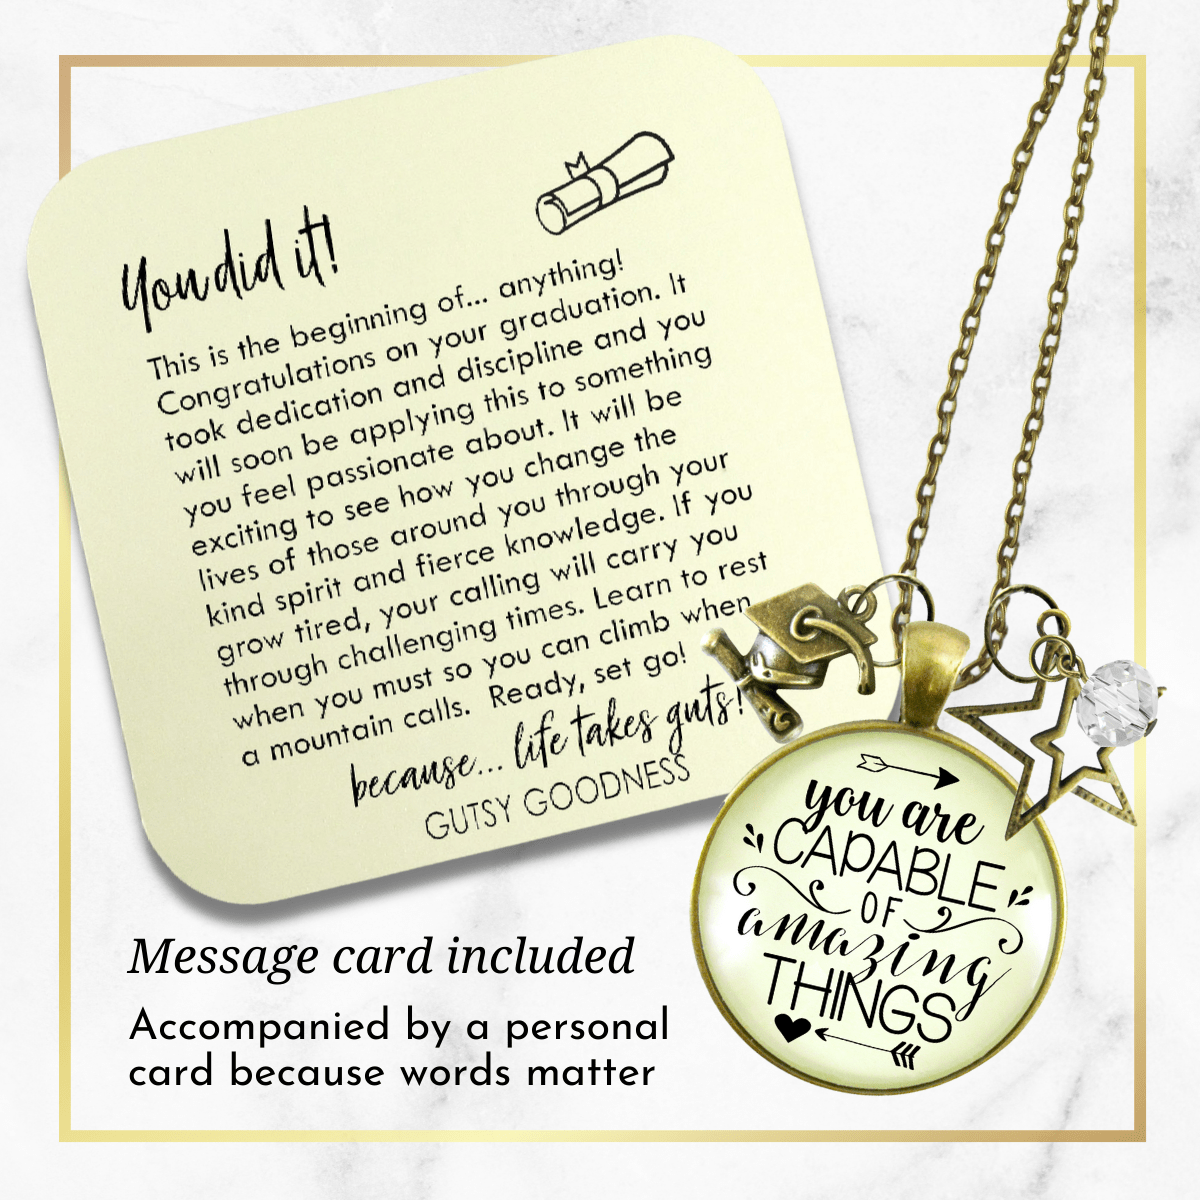 Gutsy Goodness Graduation Necklace You are Capable Of Amazing Things Womens Charm Jewelry - Gutsy Goodness Handmade Jewelry;Graduation Necklace You Are Capable Of Amazing Things Womens Charm Jewelry - Gutsy Goodness Handmade Jewelry Gifts